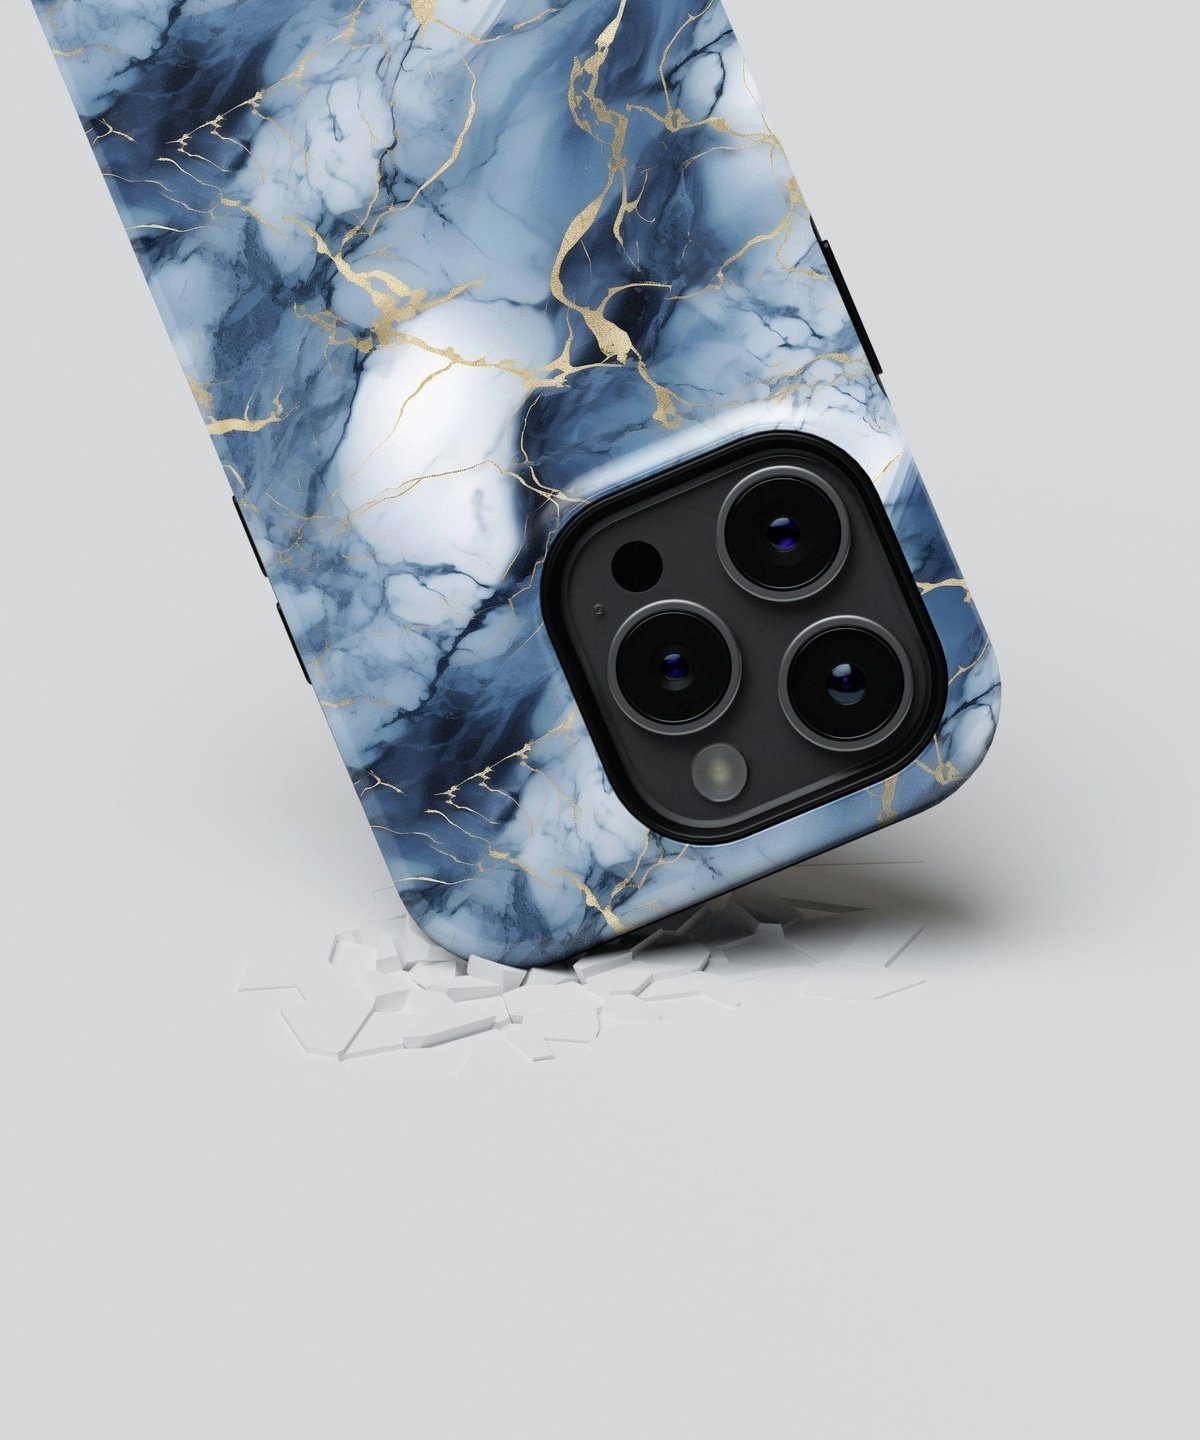 Glimpses of Marble Radiance - iPhone Case